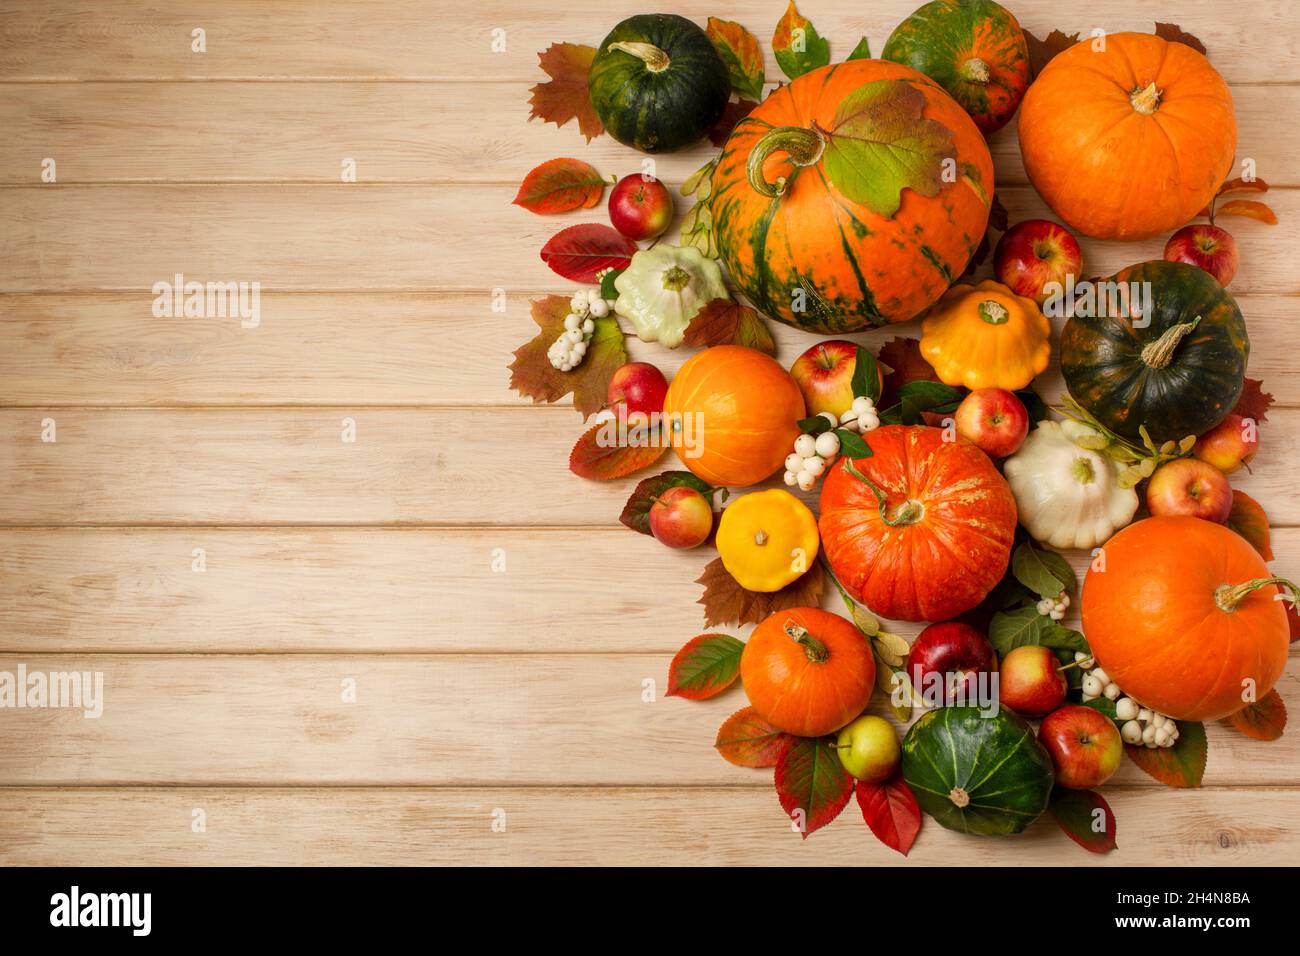 Fall arrangement with green, orange, striped pumpkins, snowberry, leaves, yellow and white squash on the white wooden background, copy space Stock Photo